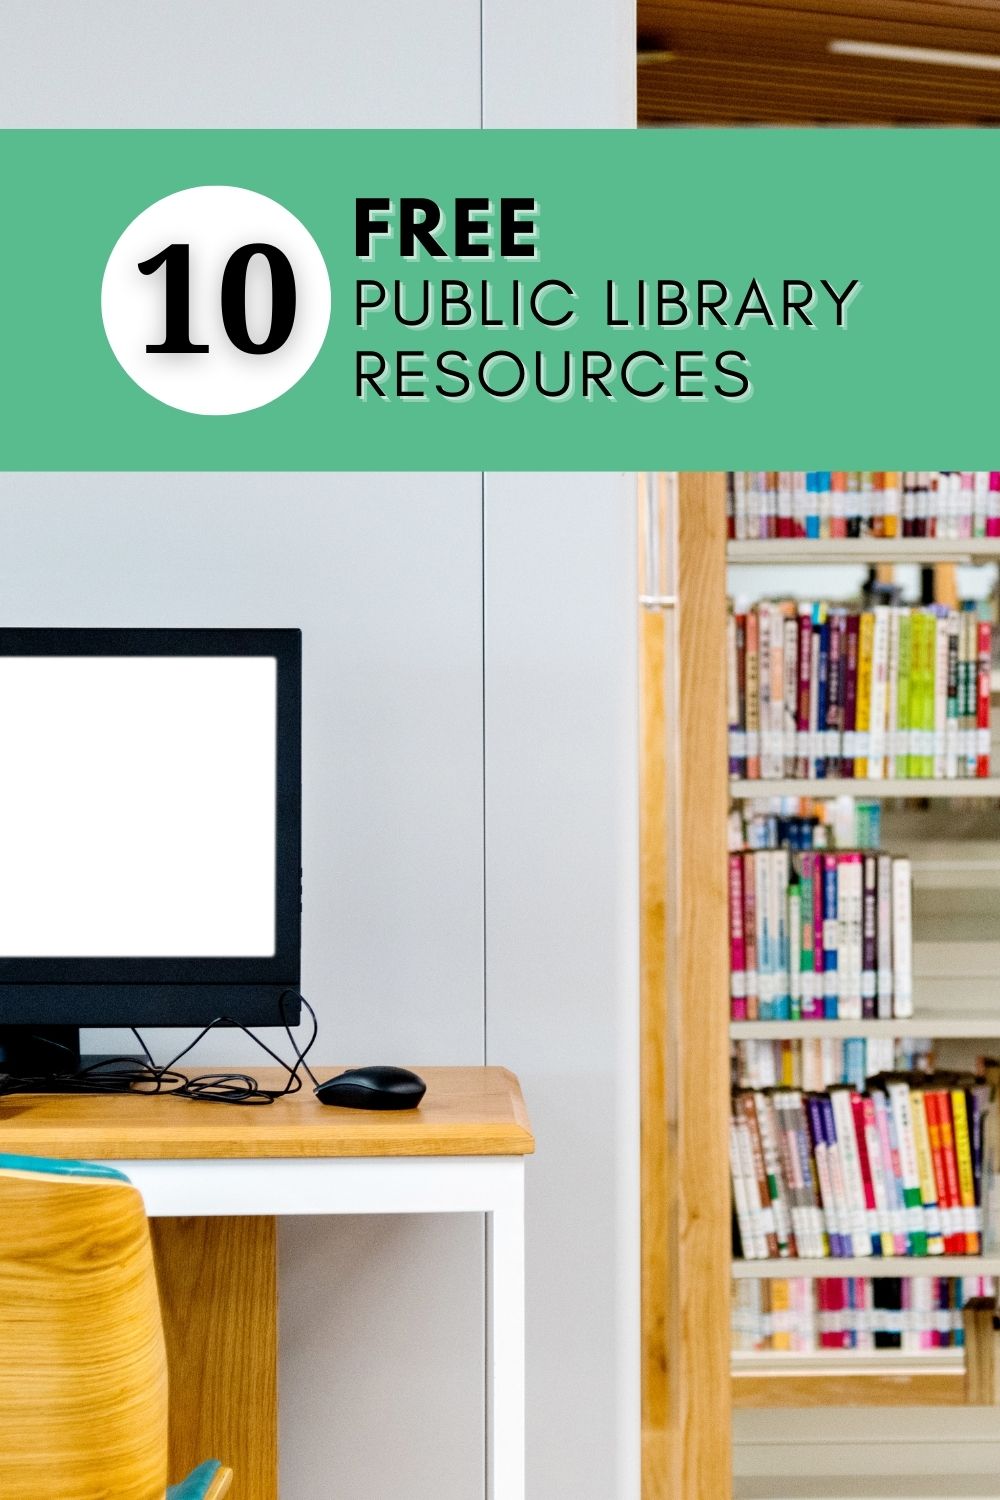 Public libraries have so much more to offer than print books. There are many free services you can take advantage of just by having a library card.